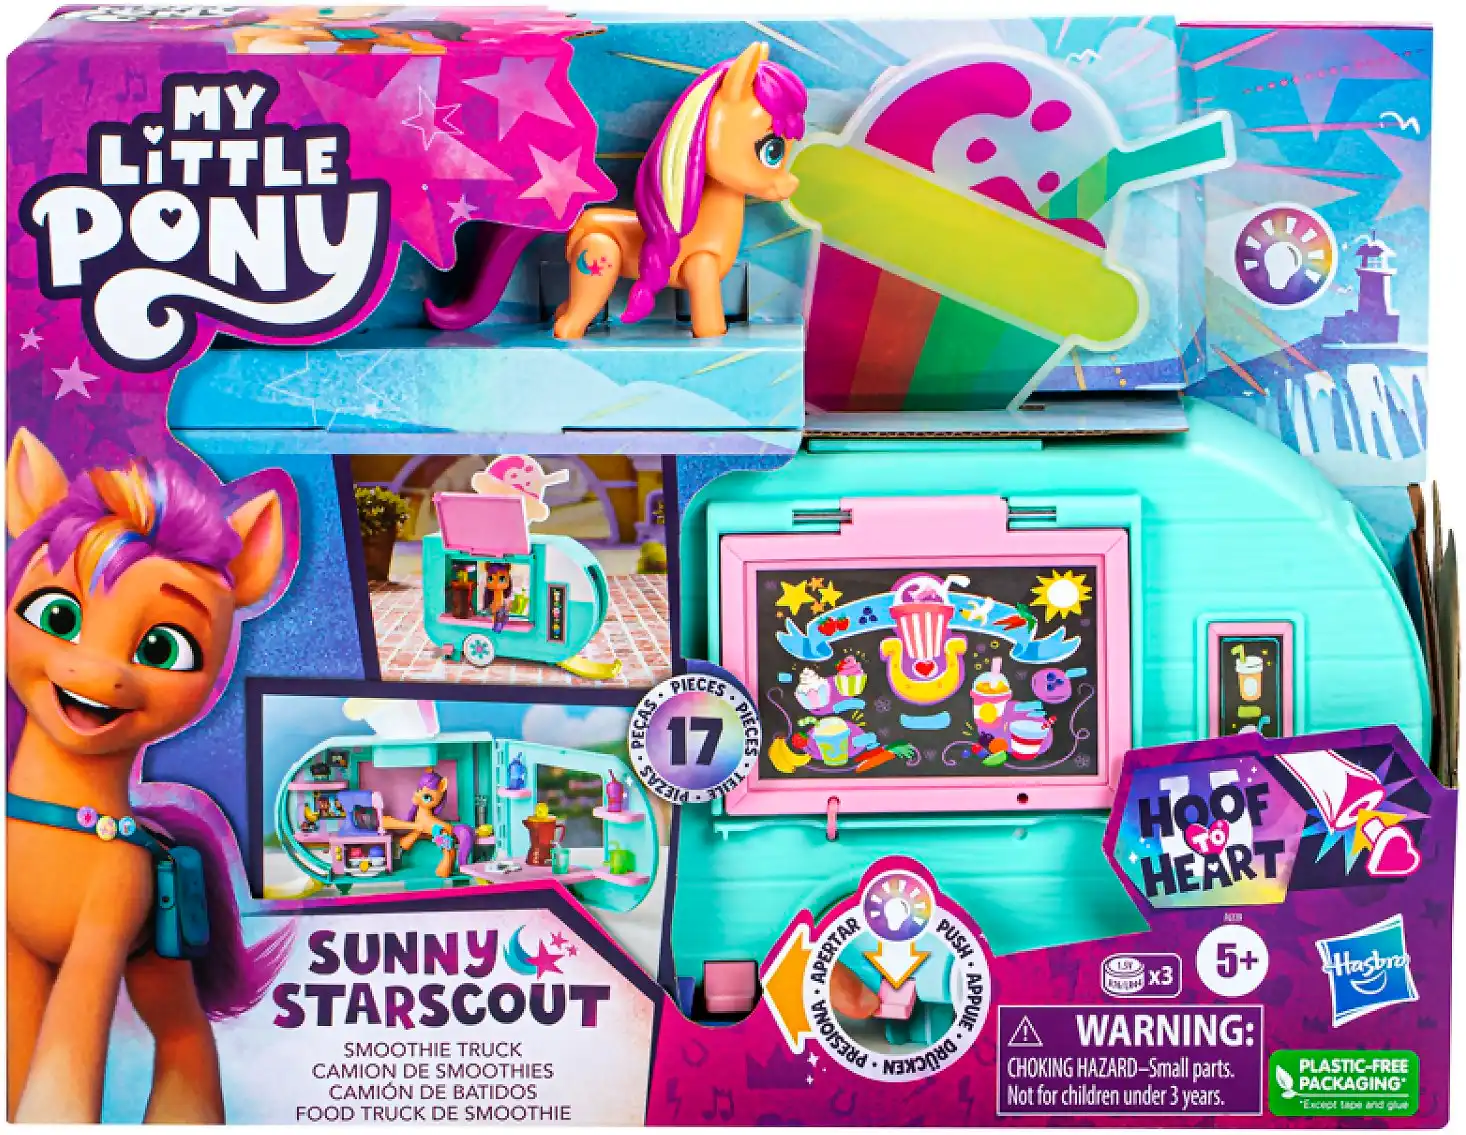 My Little Pony - Sunny Starscout Smoothie Truck Playset - Hasbro